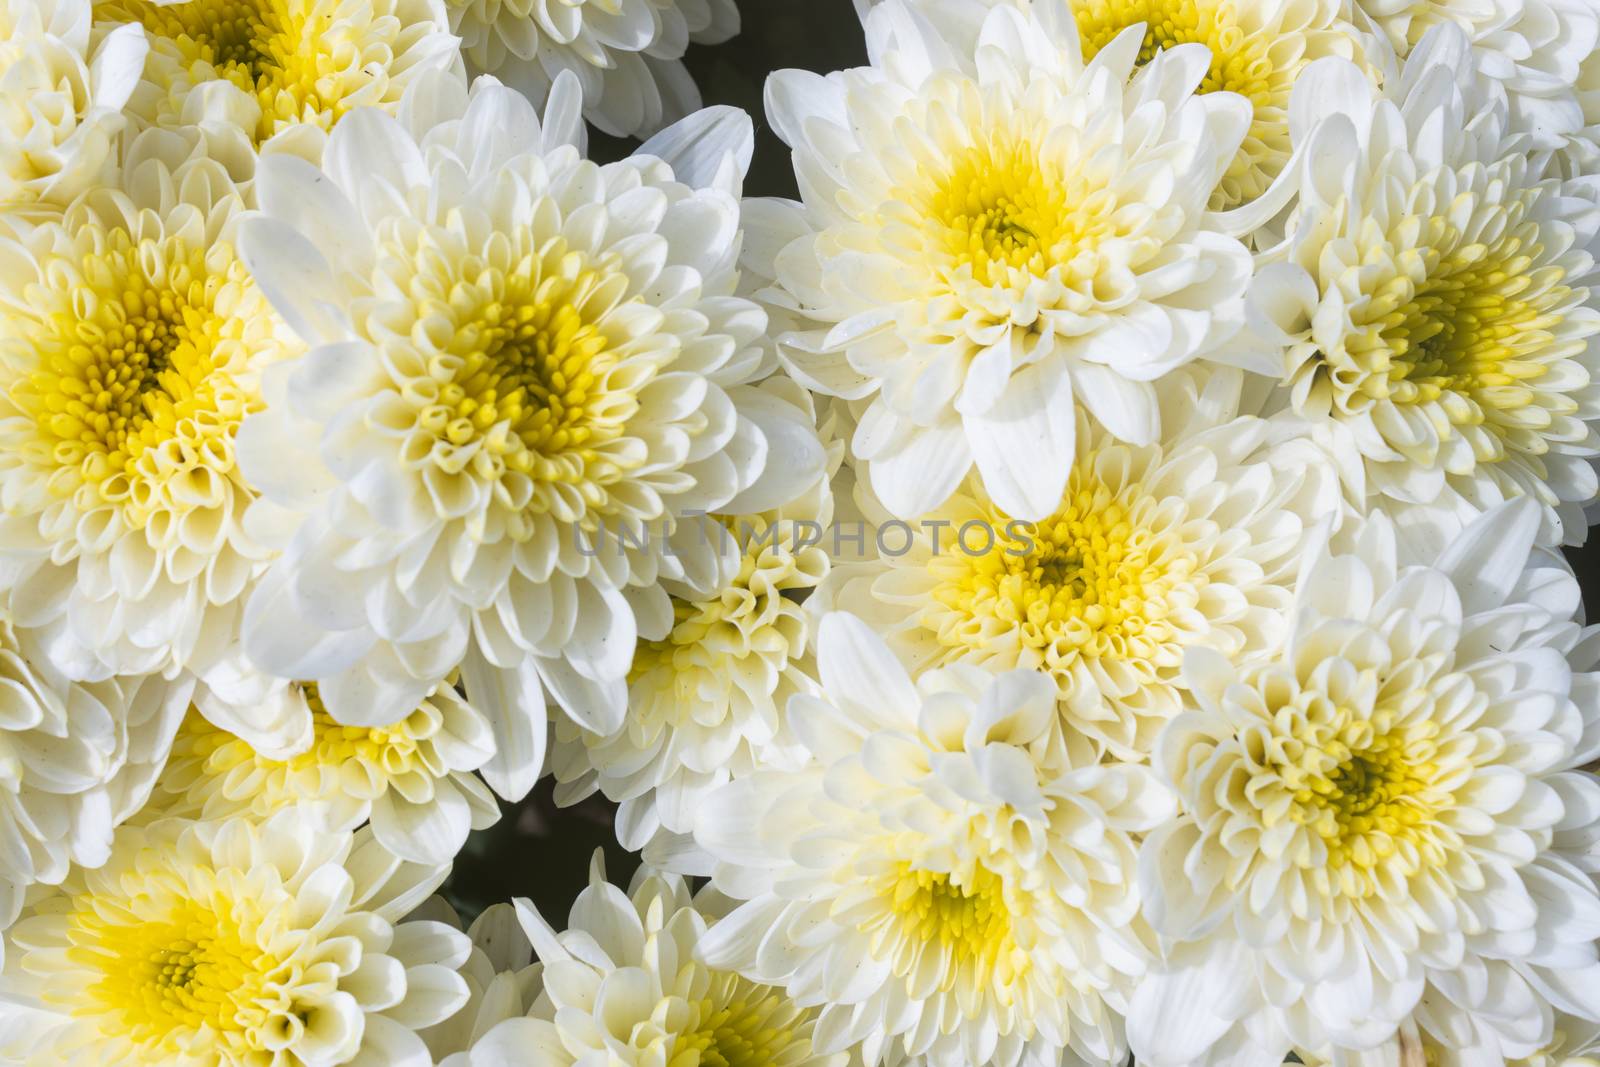 White Chrysanthemum or Mums Flowers in Garden with Natural Light on Flatlay and Zoom View